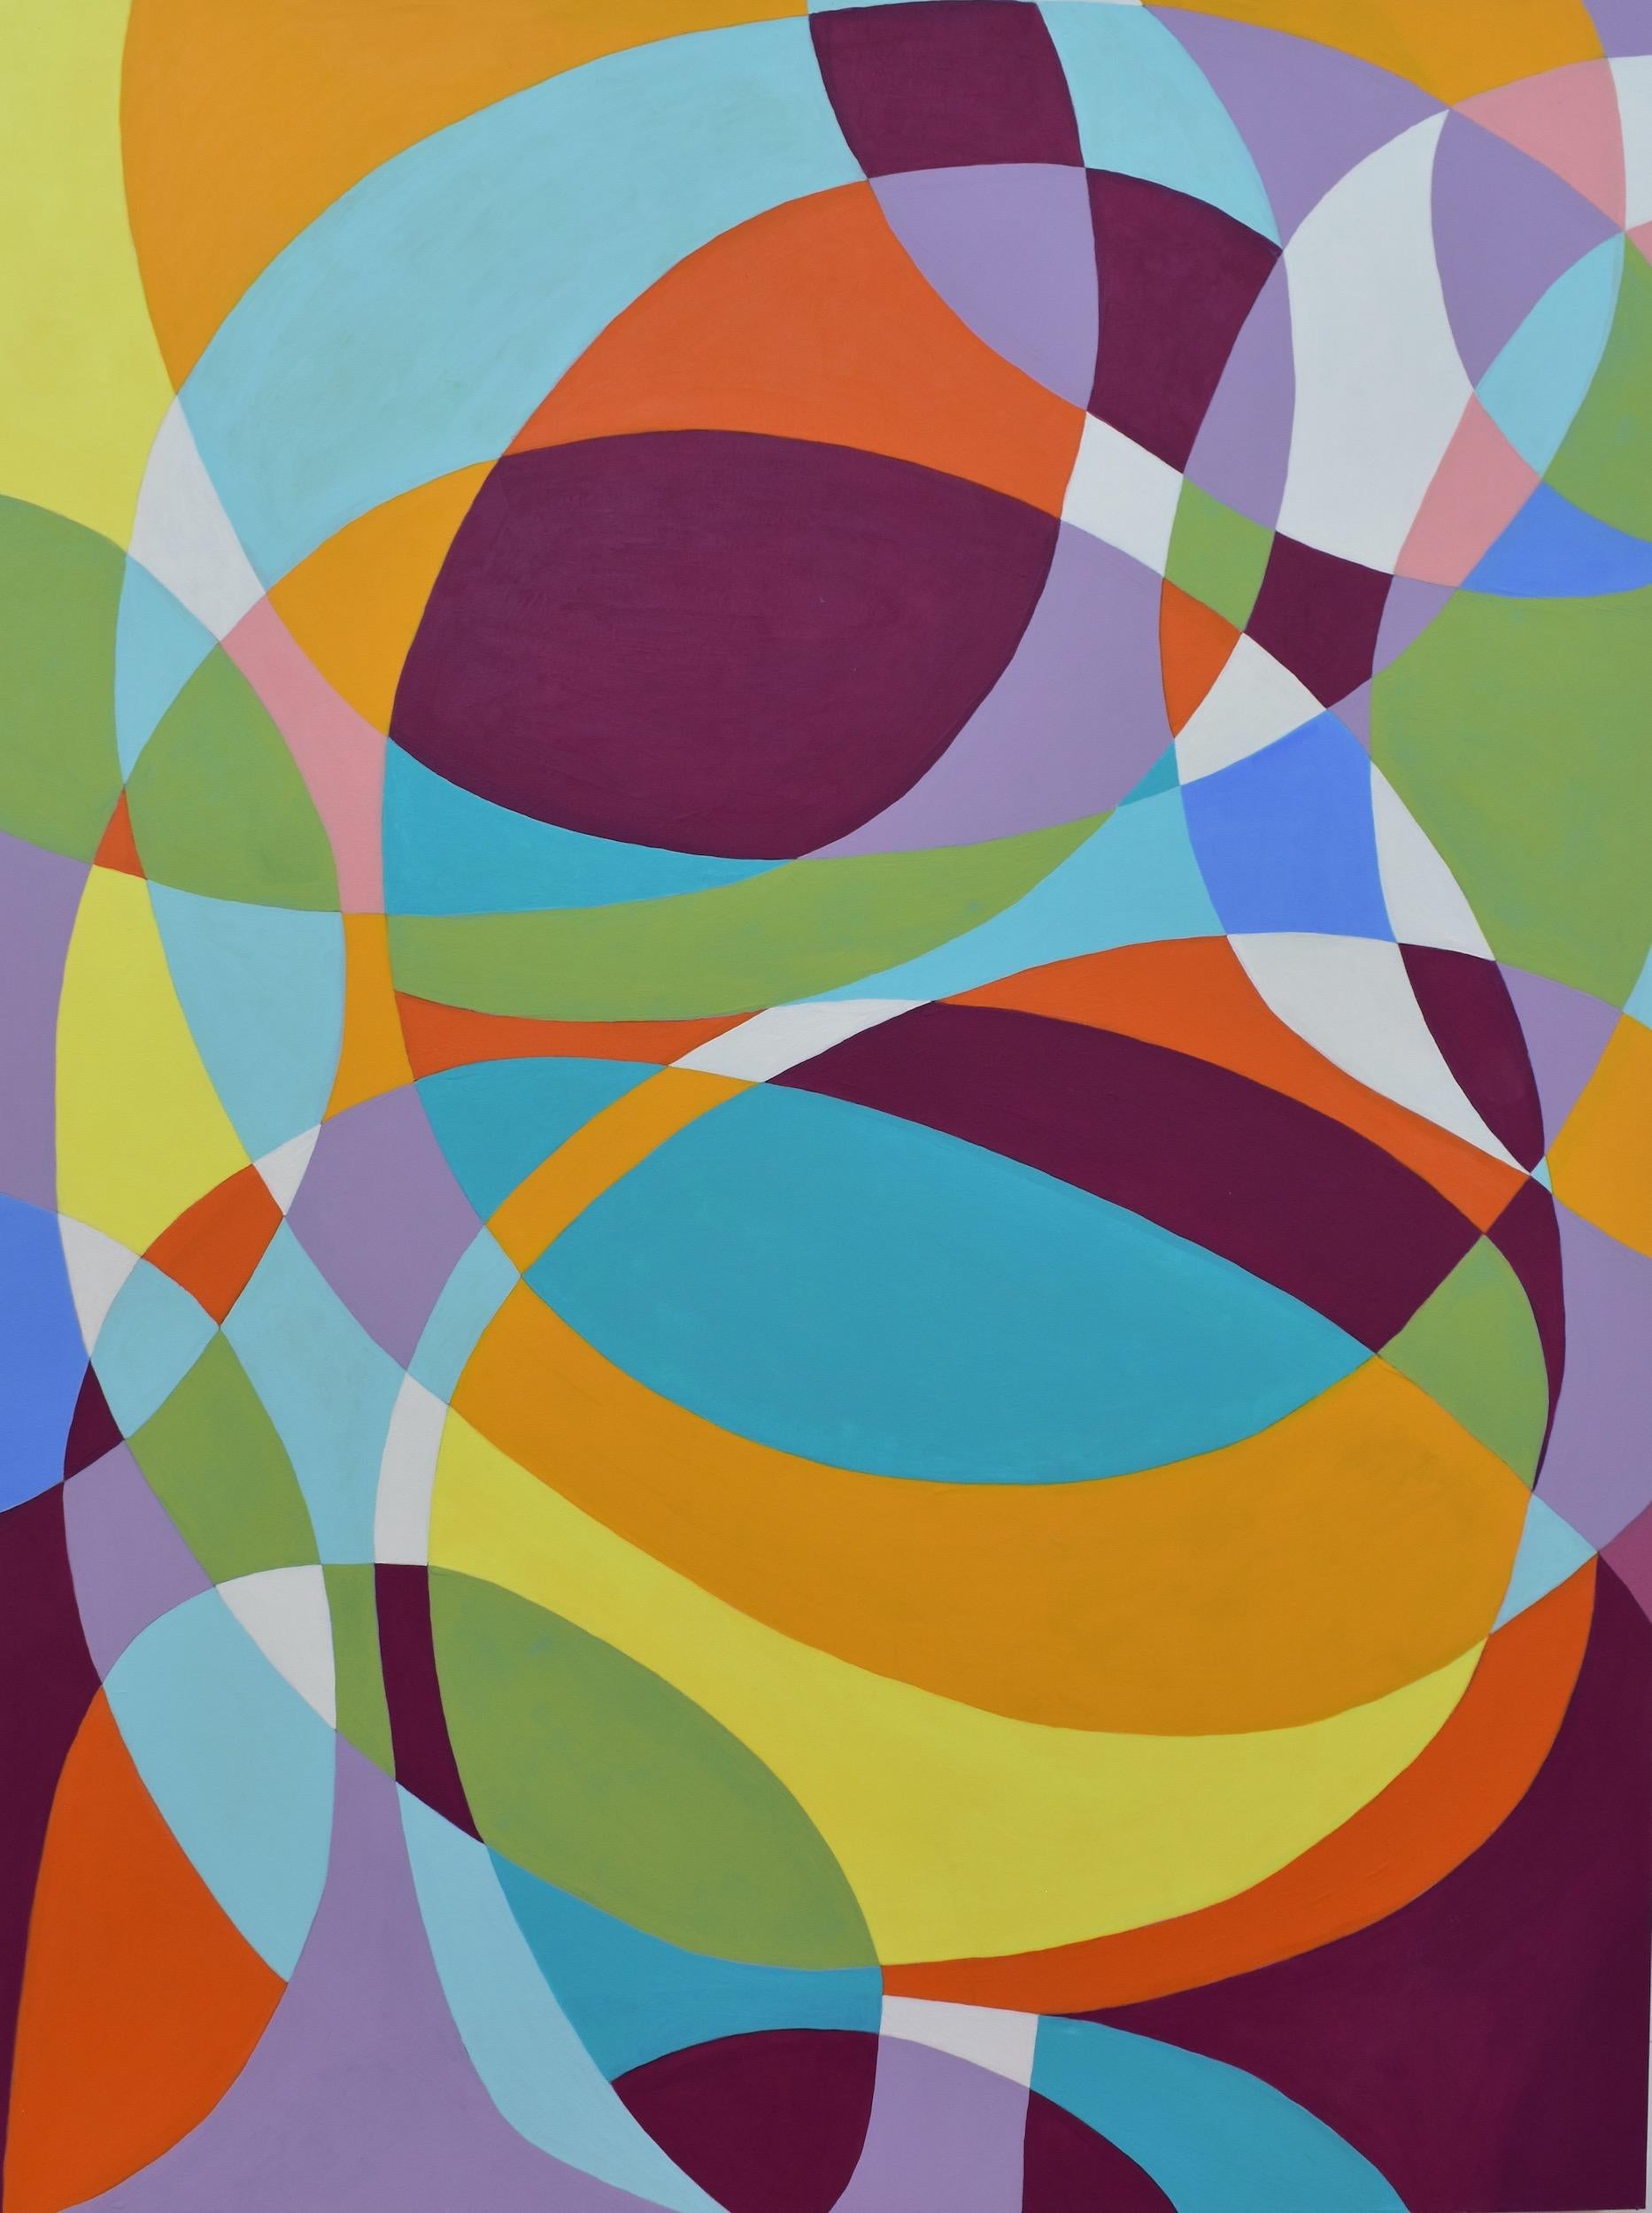 "Confluence 2", abstract, ovals, teal, violet, green, acrylic painting - Painting by Denise Driscoll